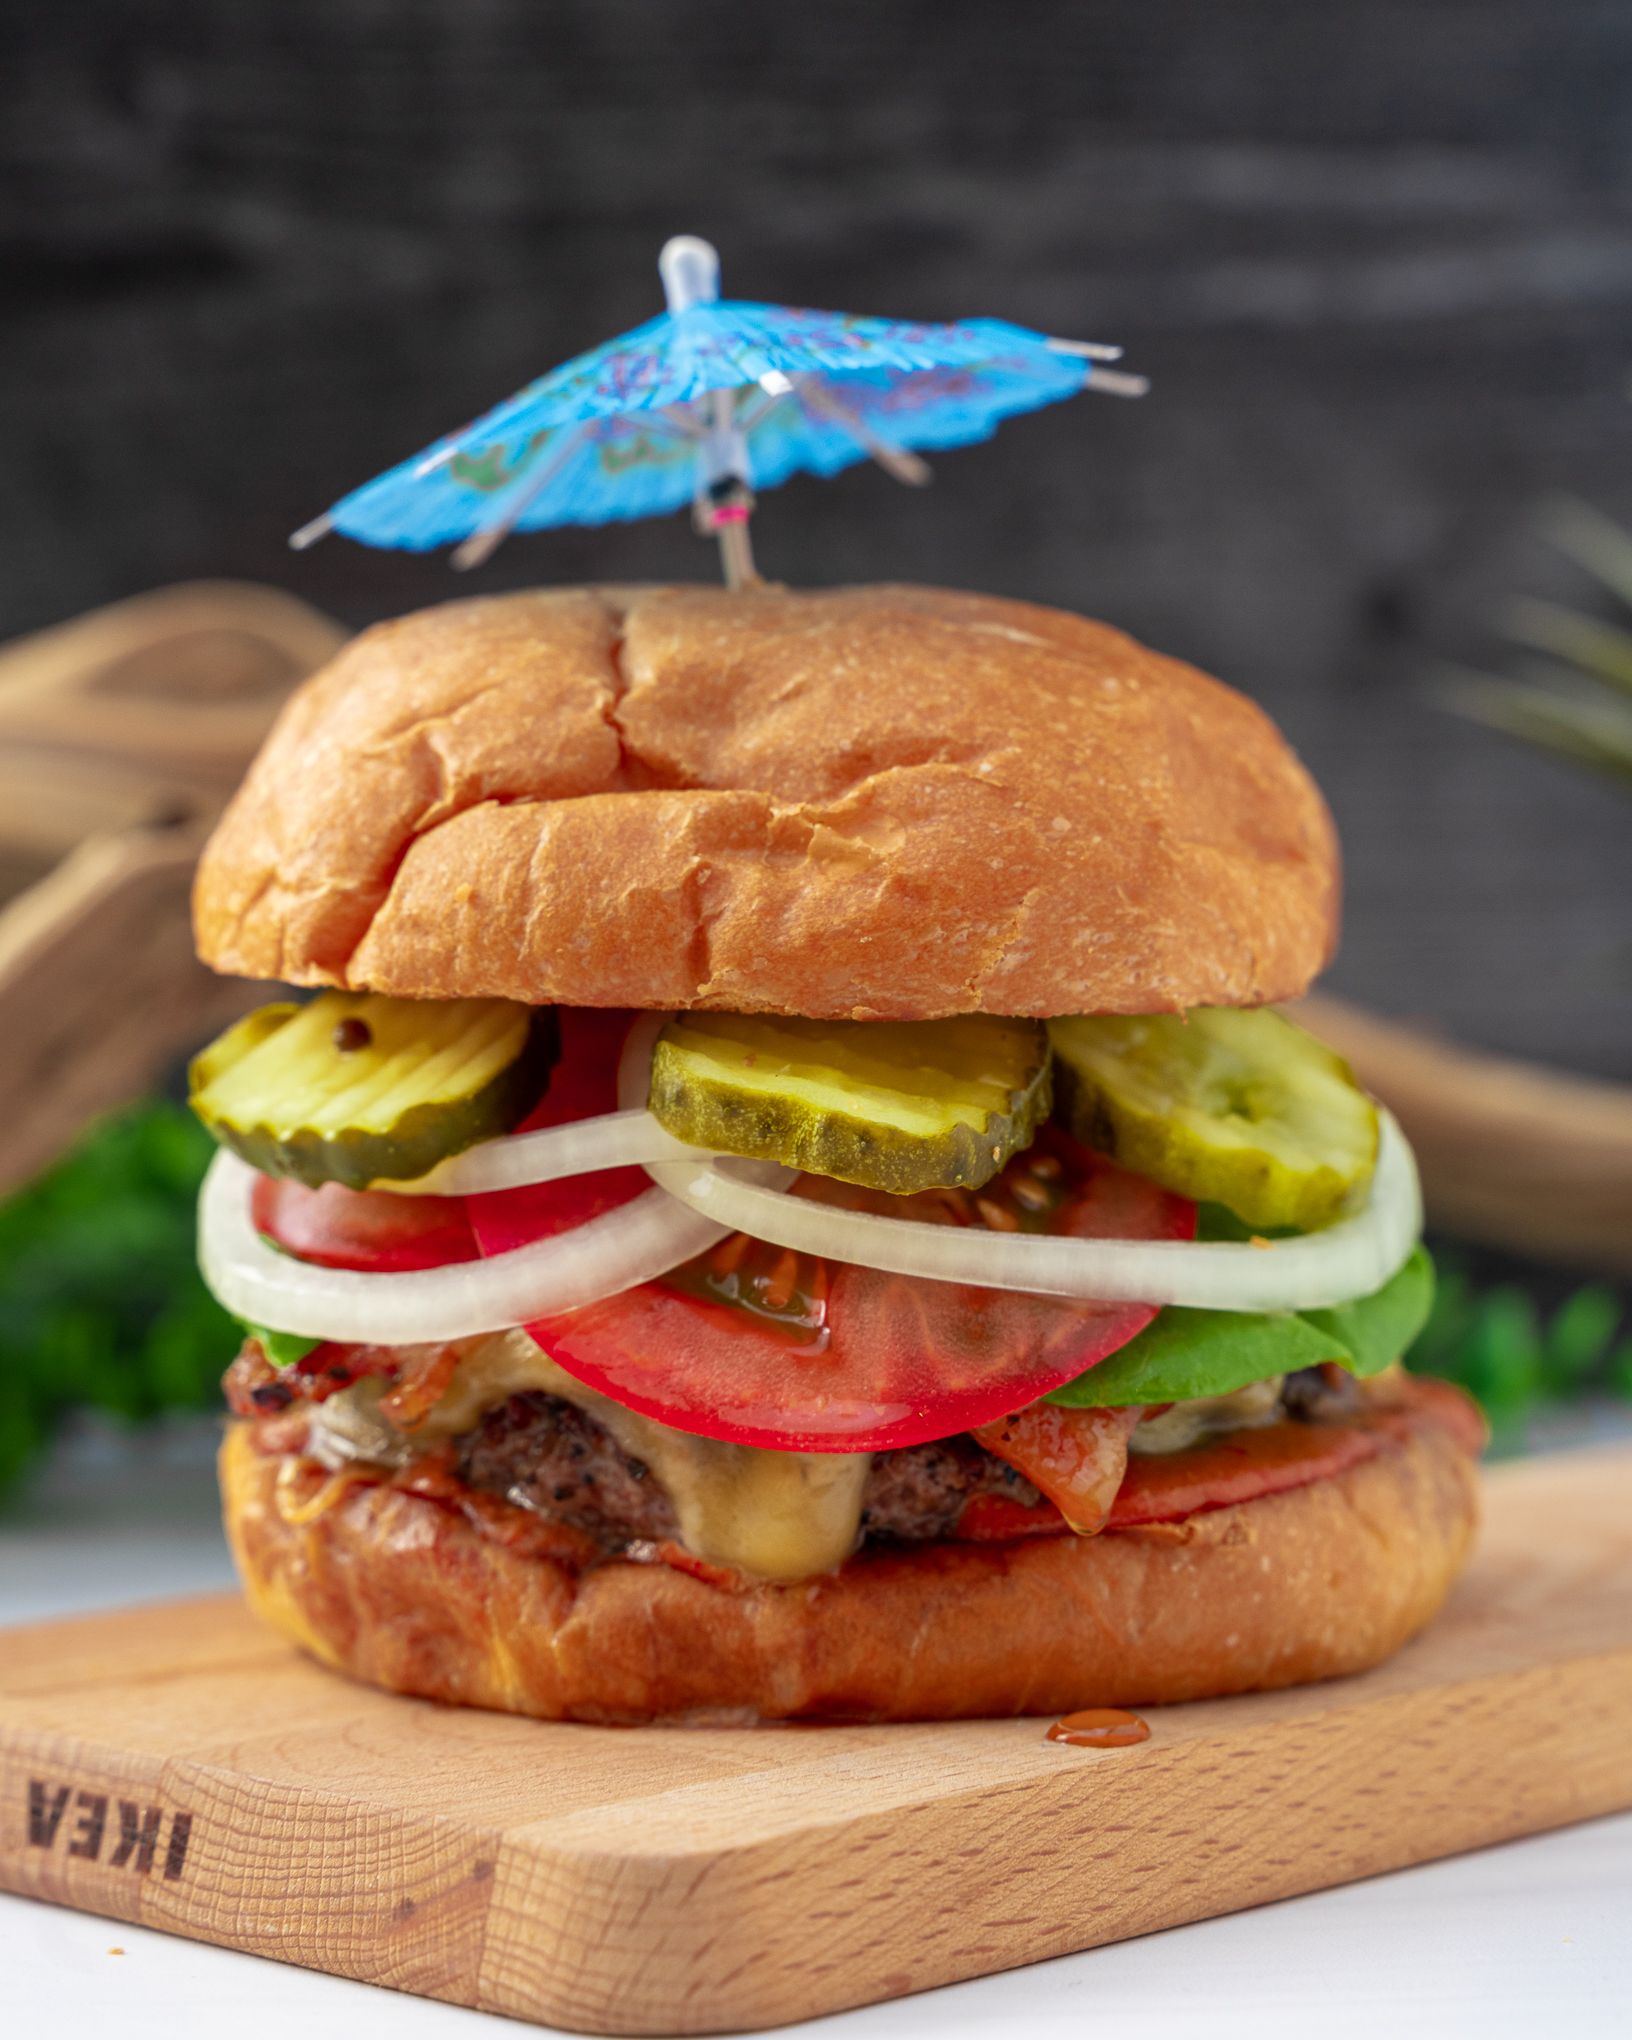 a burger with onions, pickles and tomatoes and topped with a blue cocktail umbrella